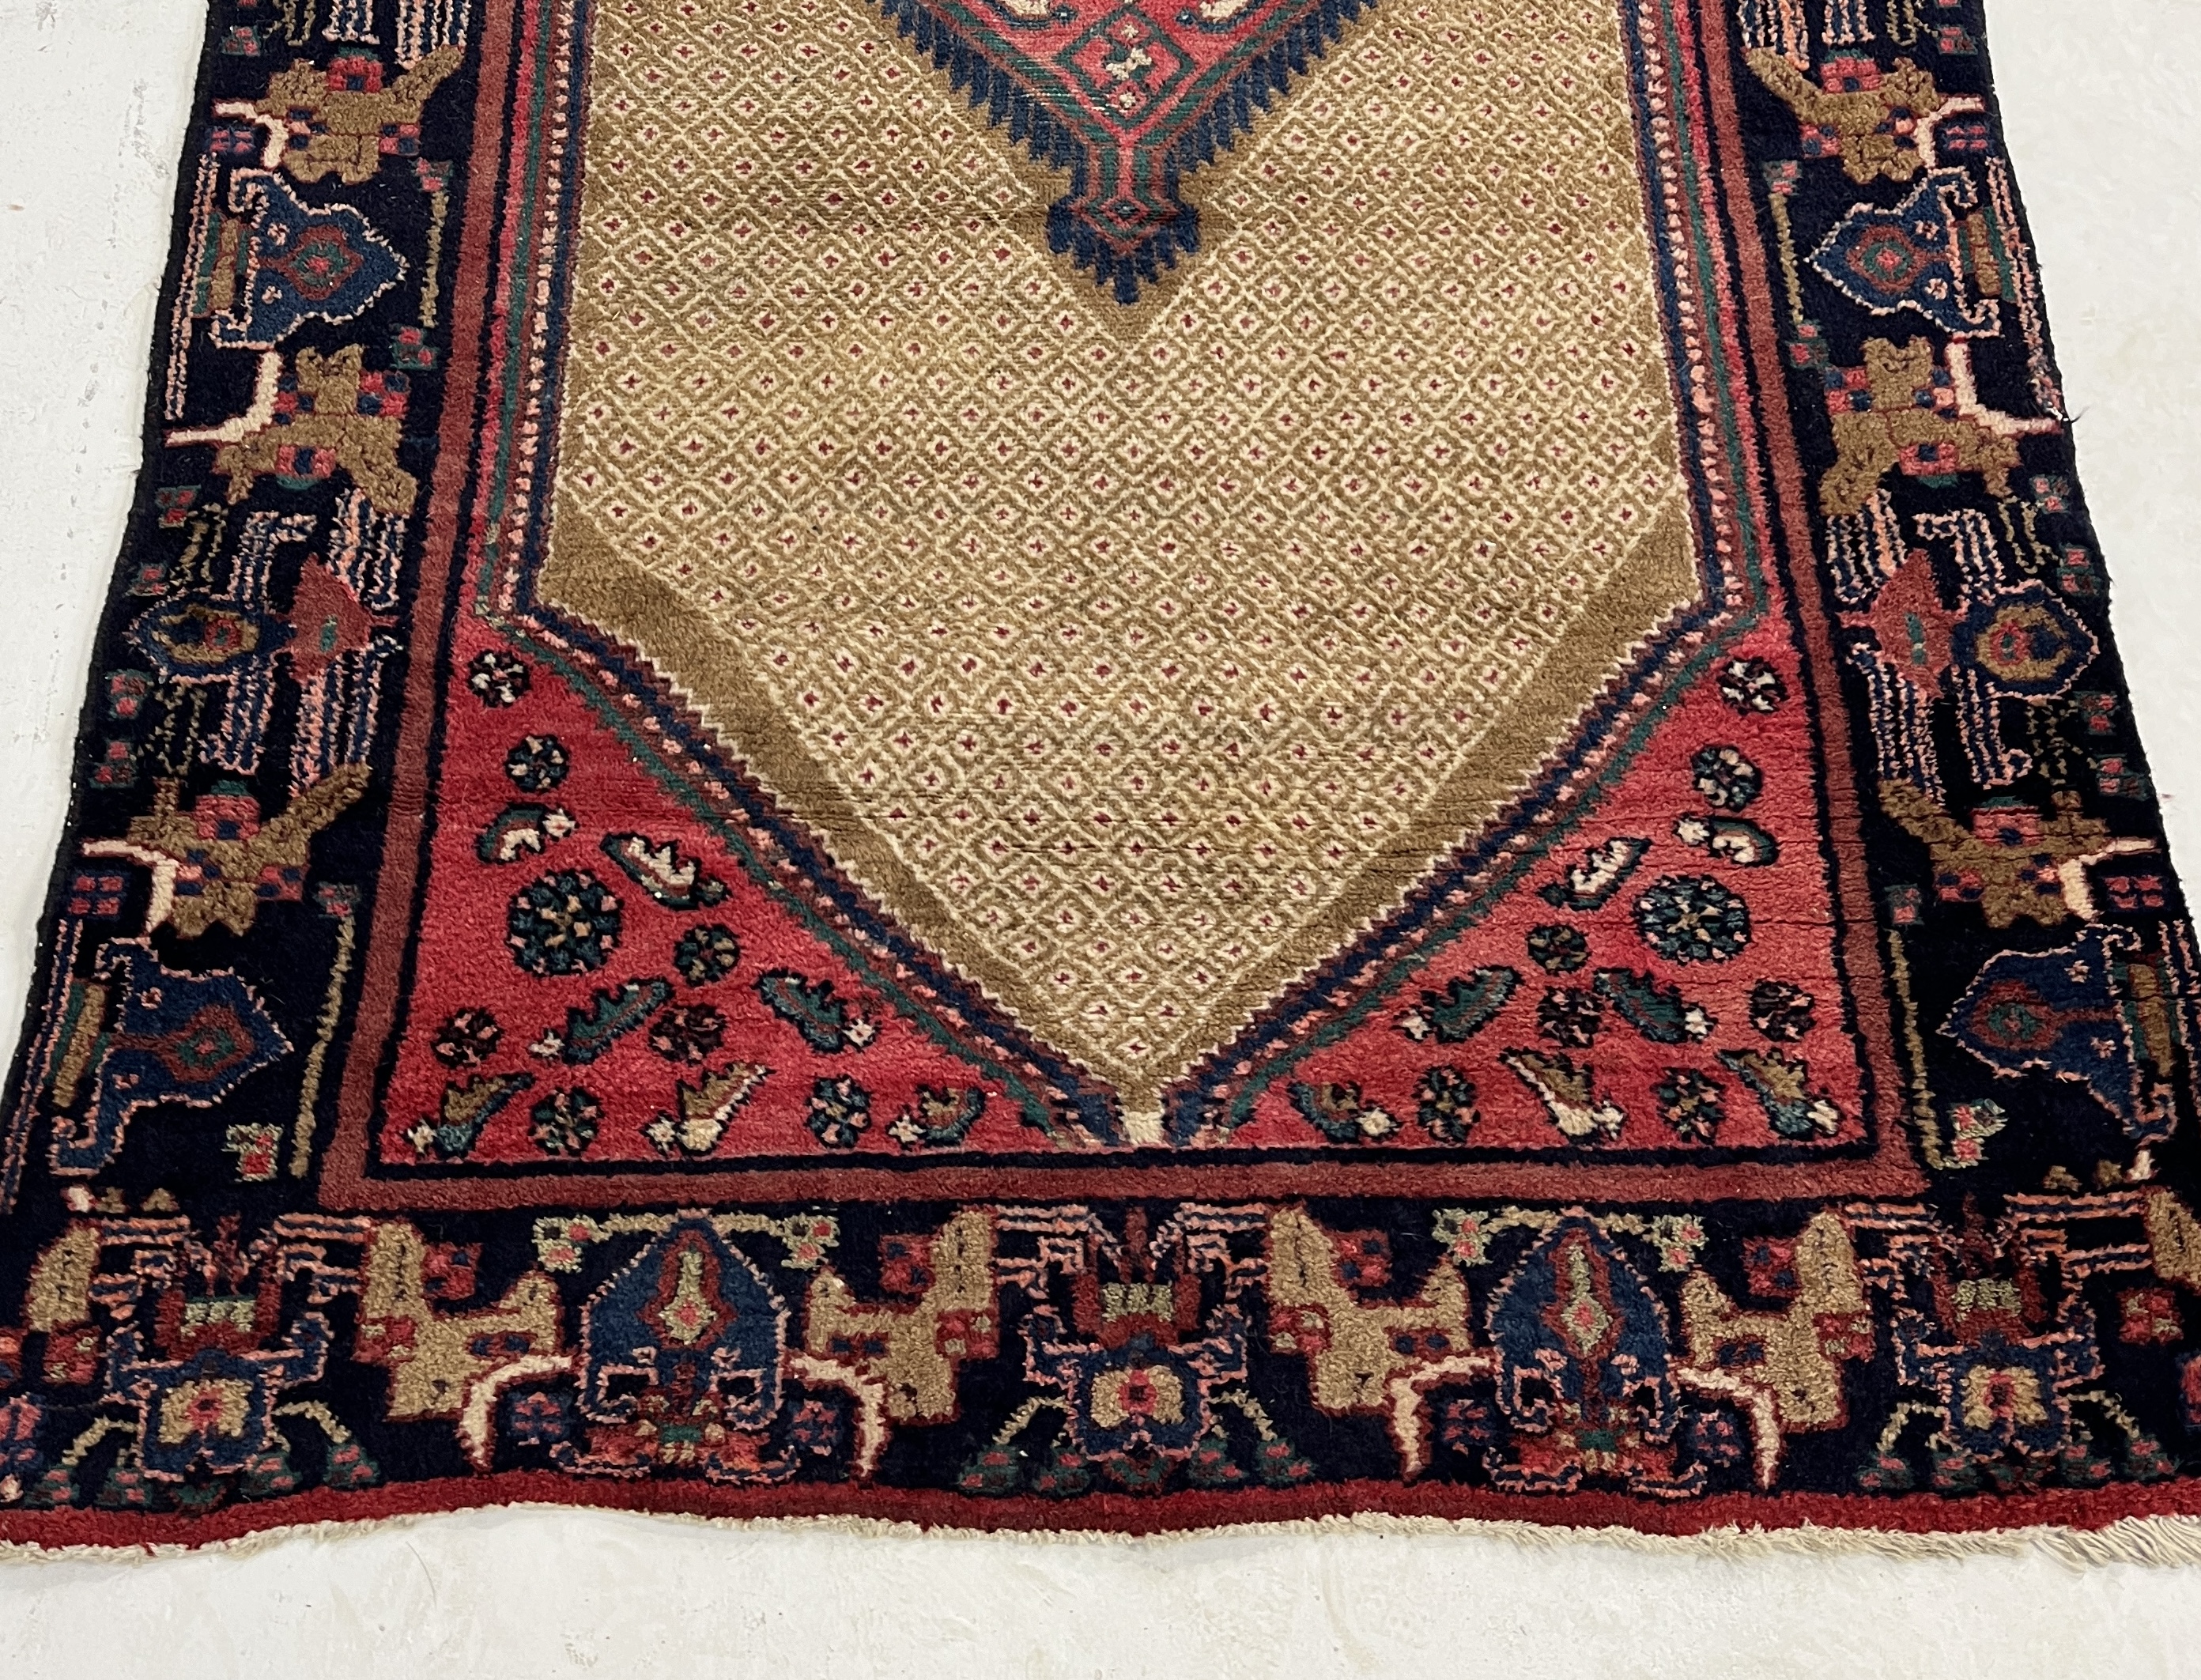 A Eastern red ground rug with central motif - 212cm x 122cm - Image 2 of 4